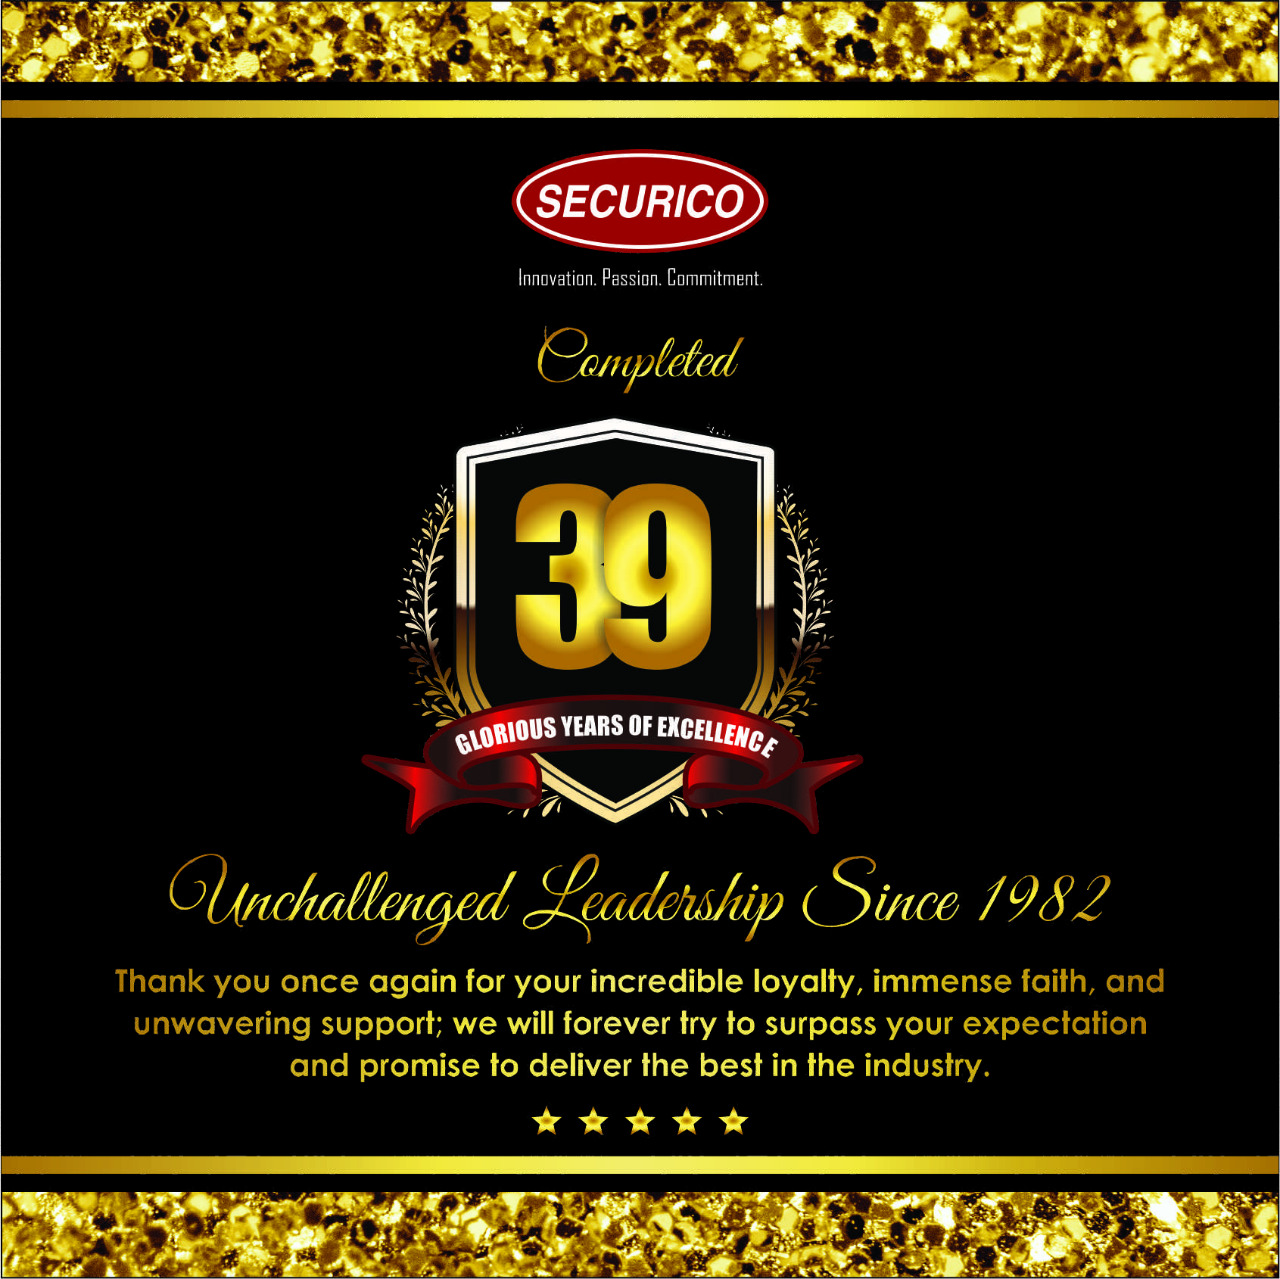 Securico 39 Successful Years